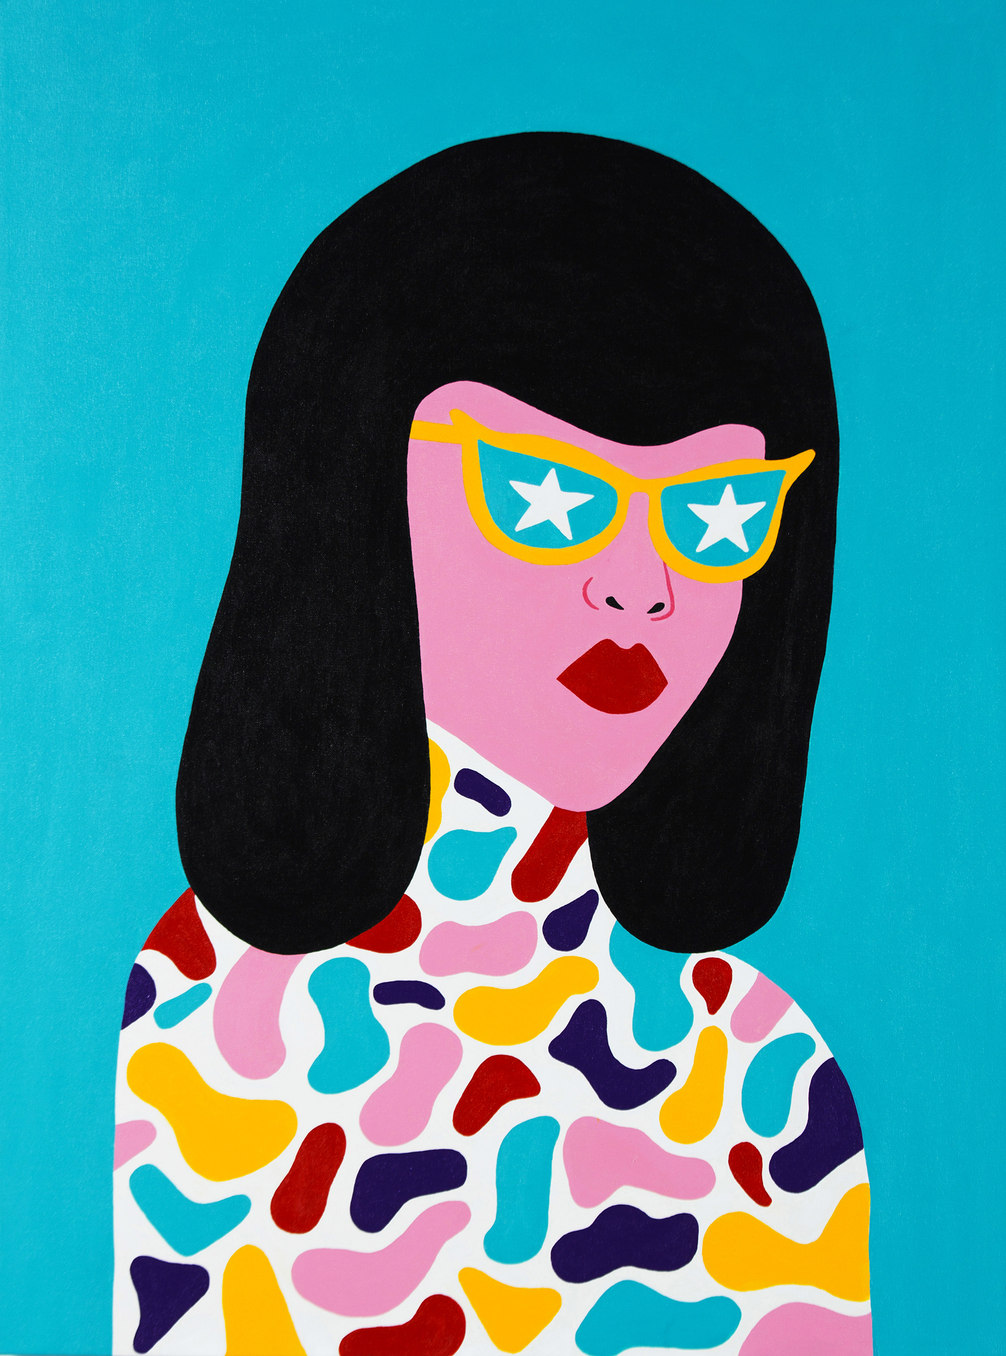 Illustration of a woman wearing colorful sunglasses